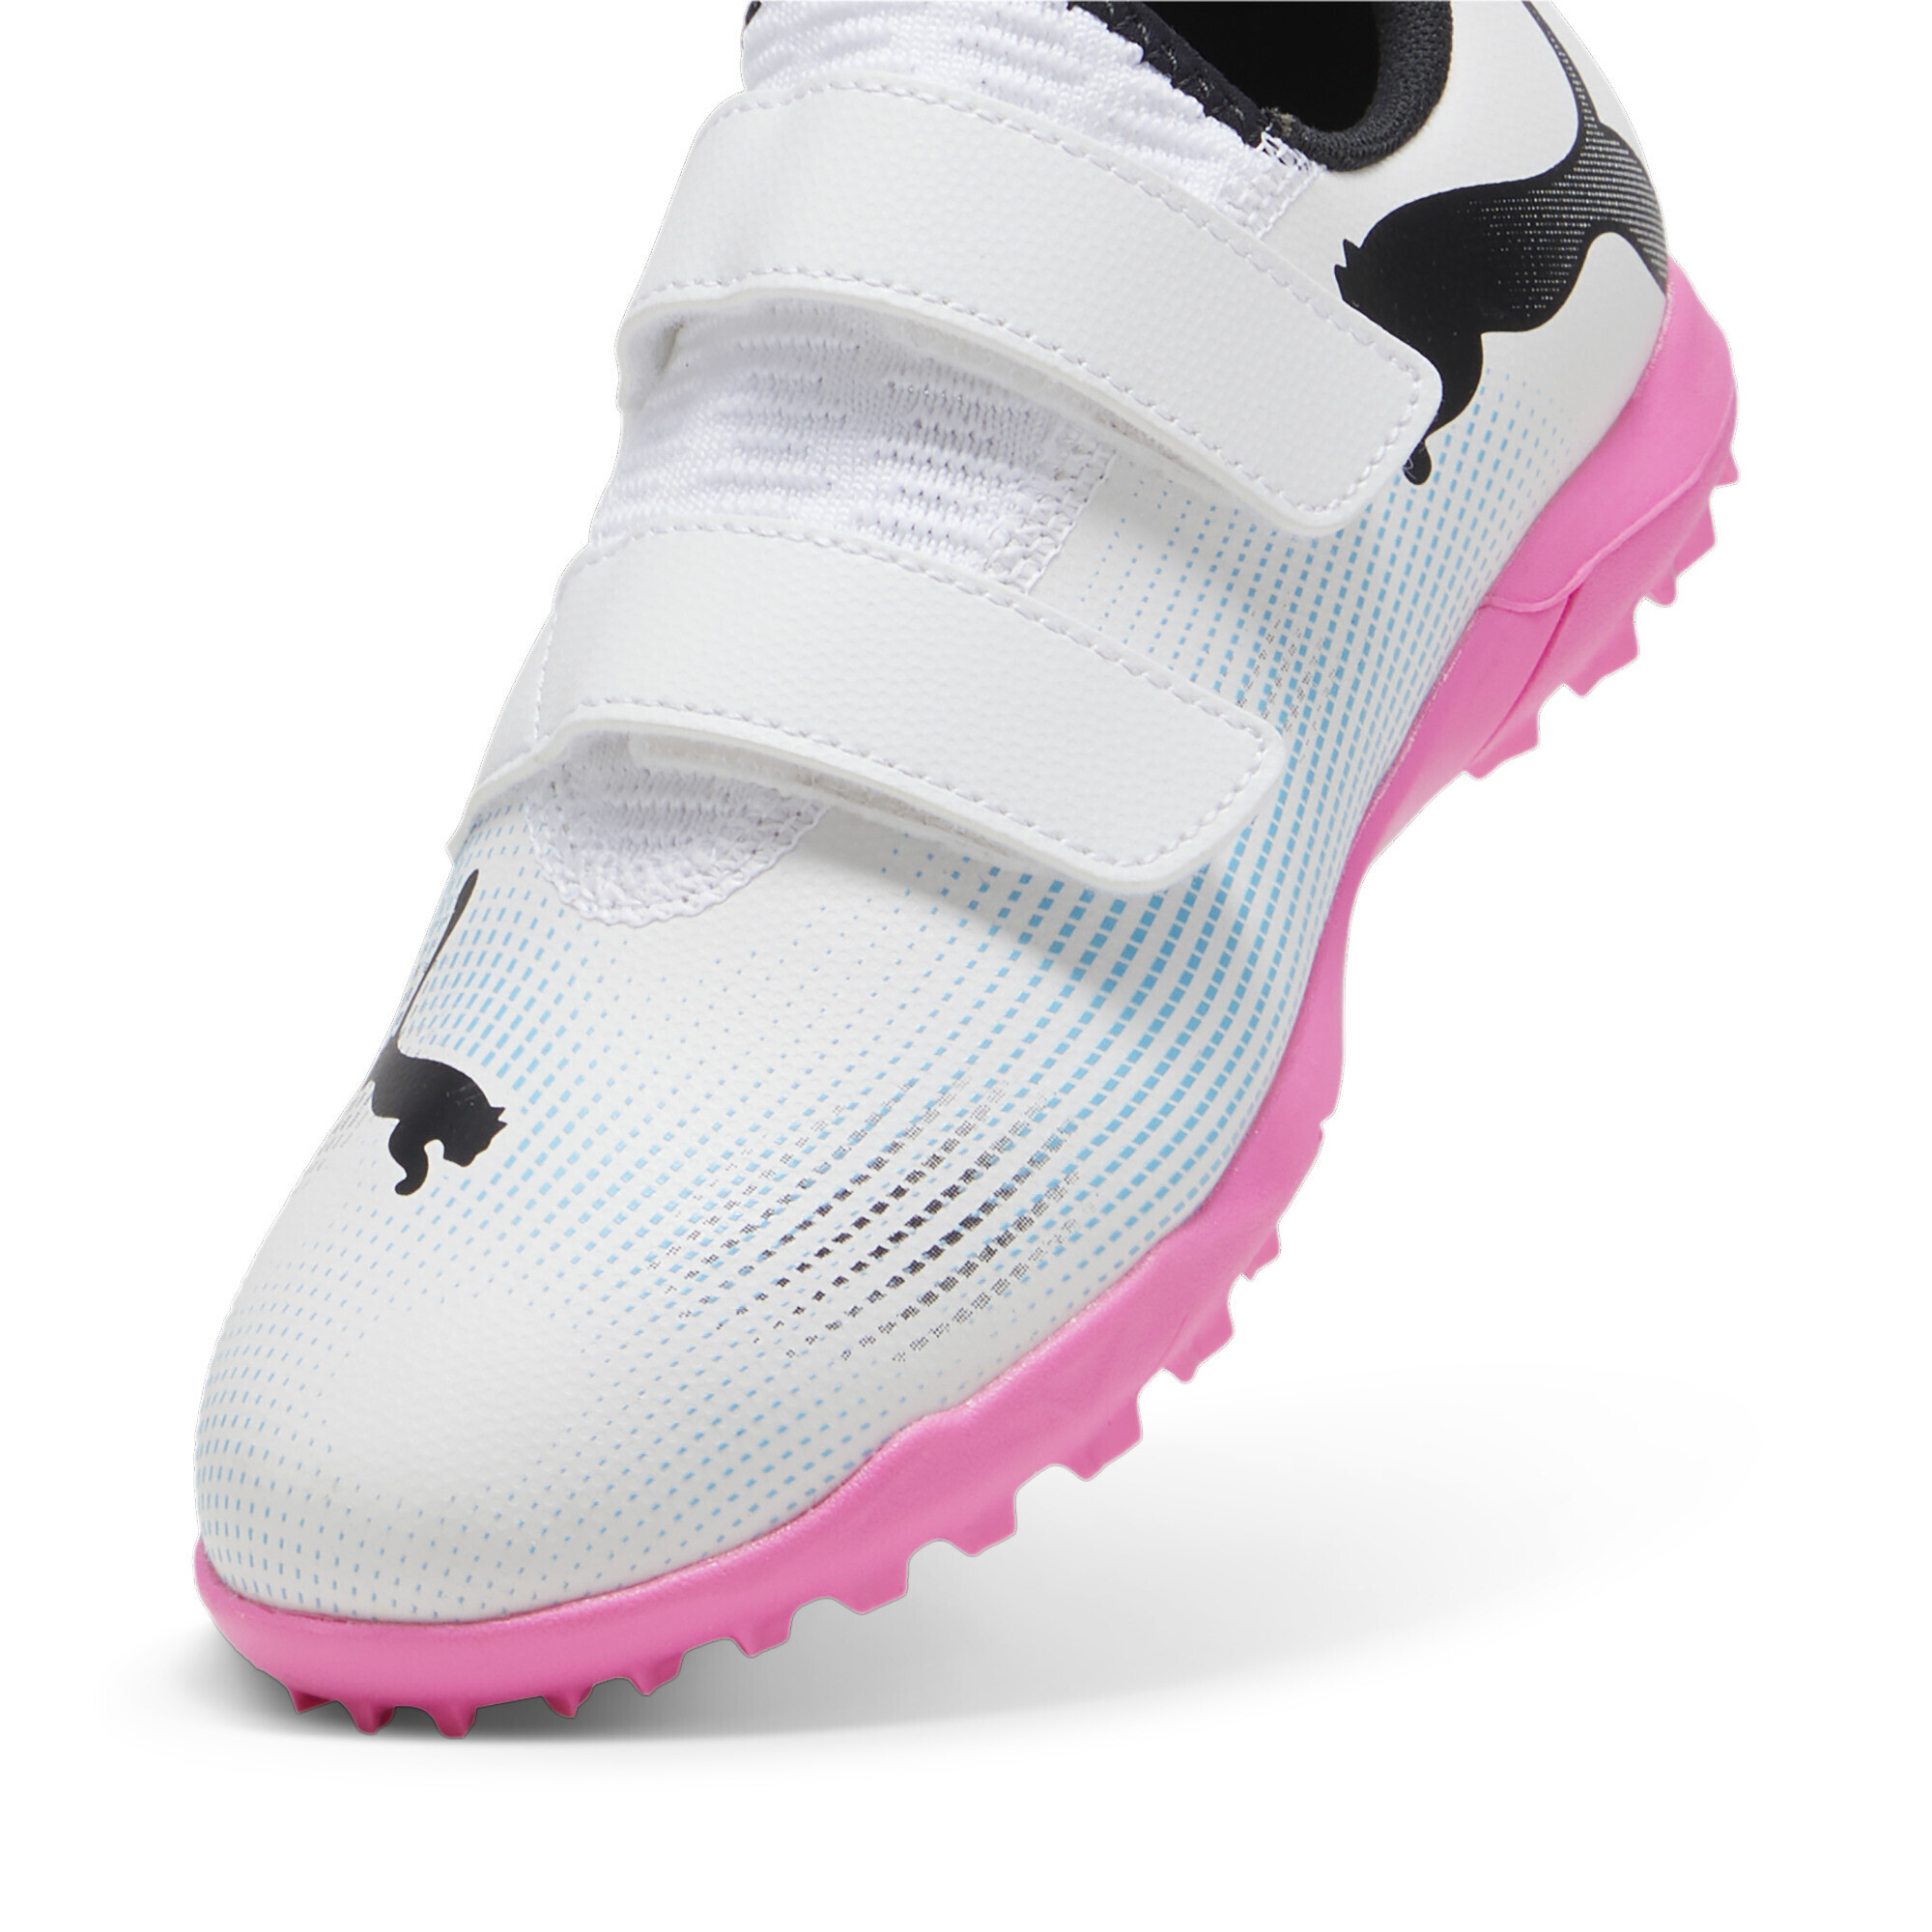 PUMA FUTURE 7 PLAY TT Youth Football Boots In White/Pink, Size EU 35.5